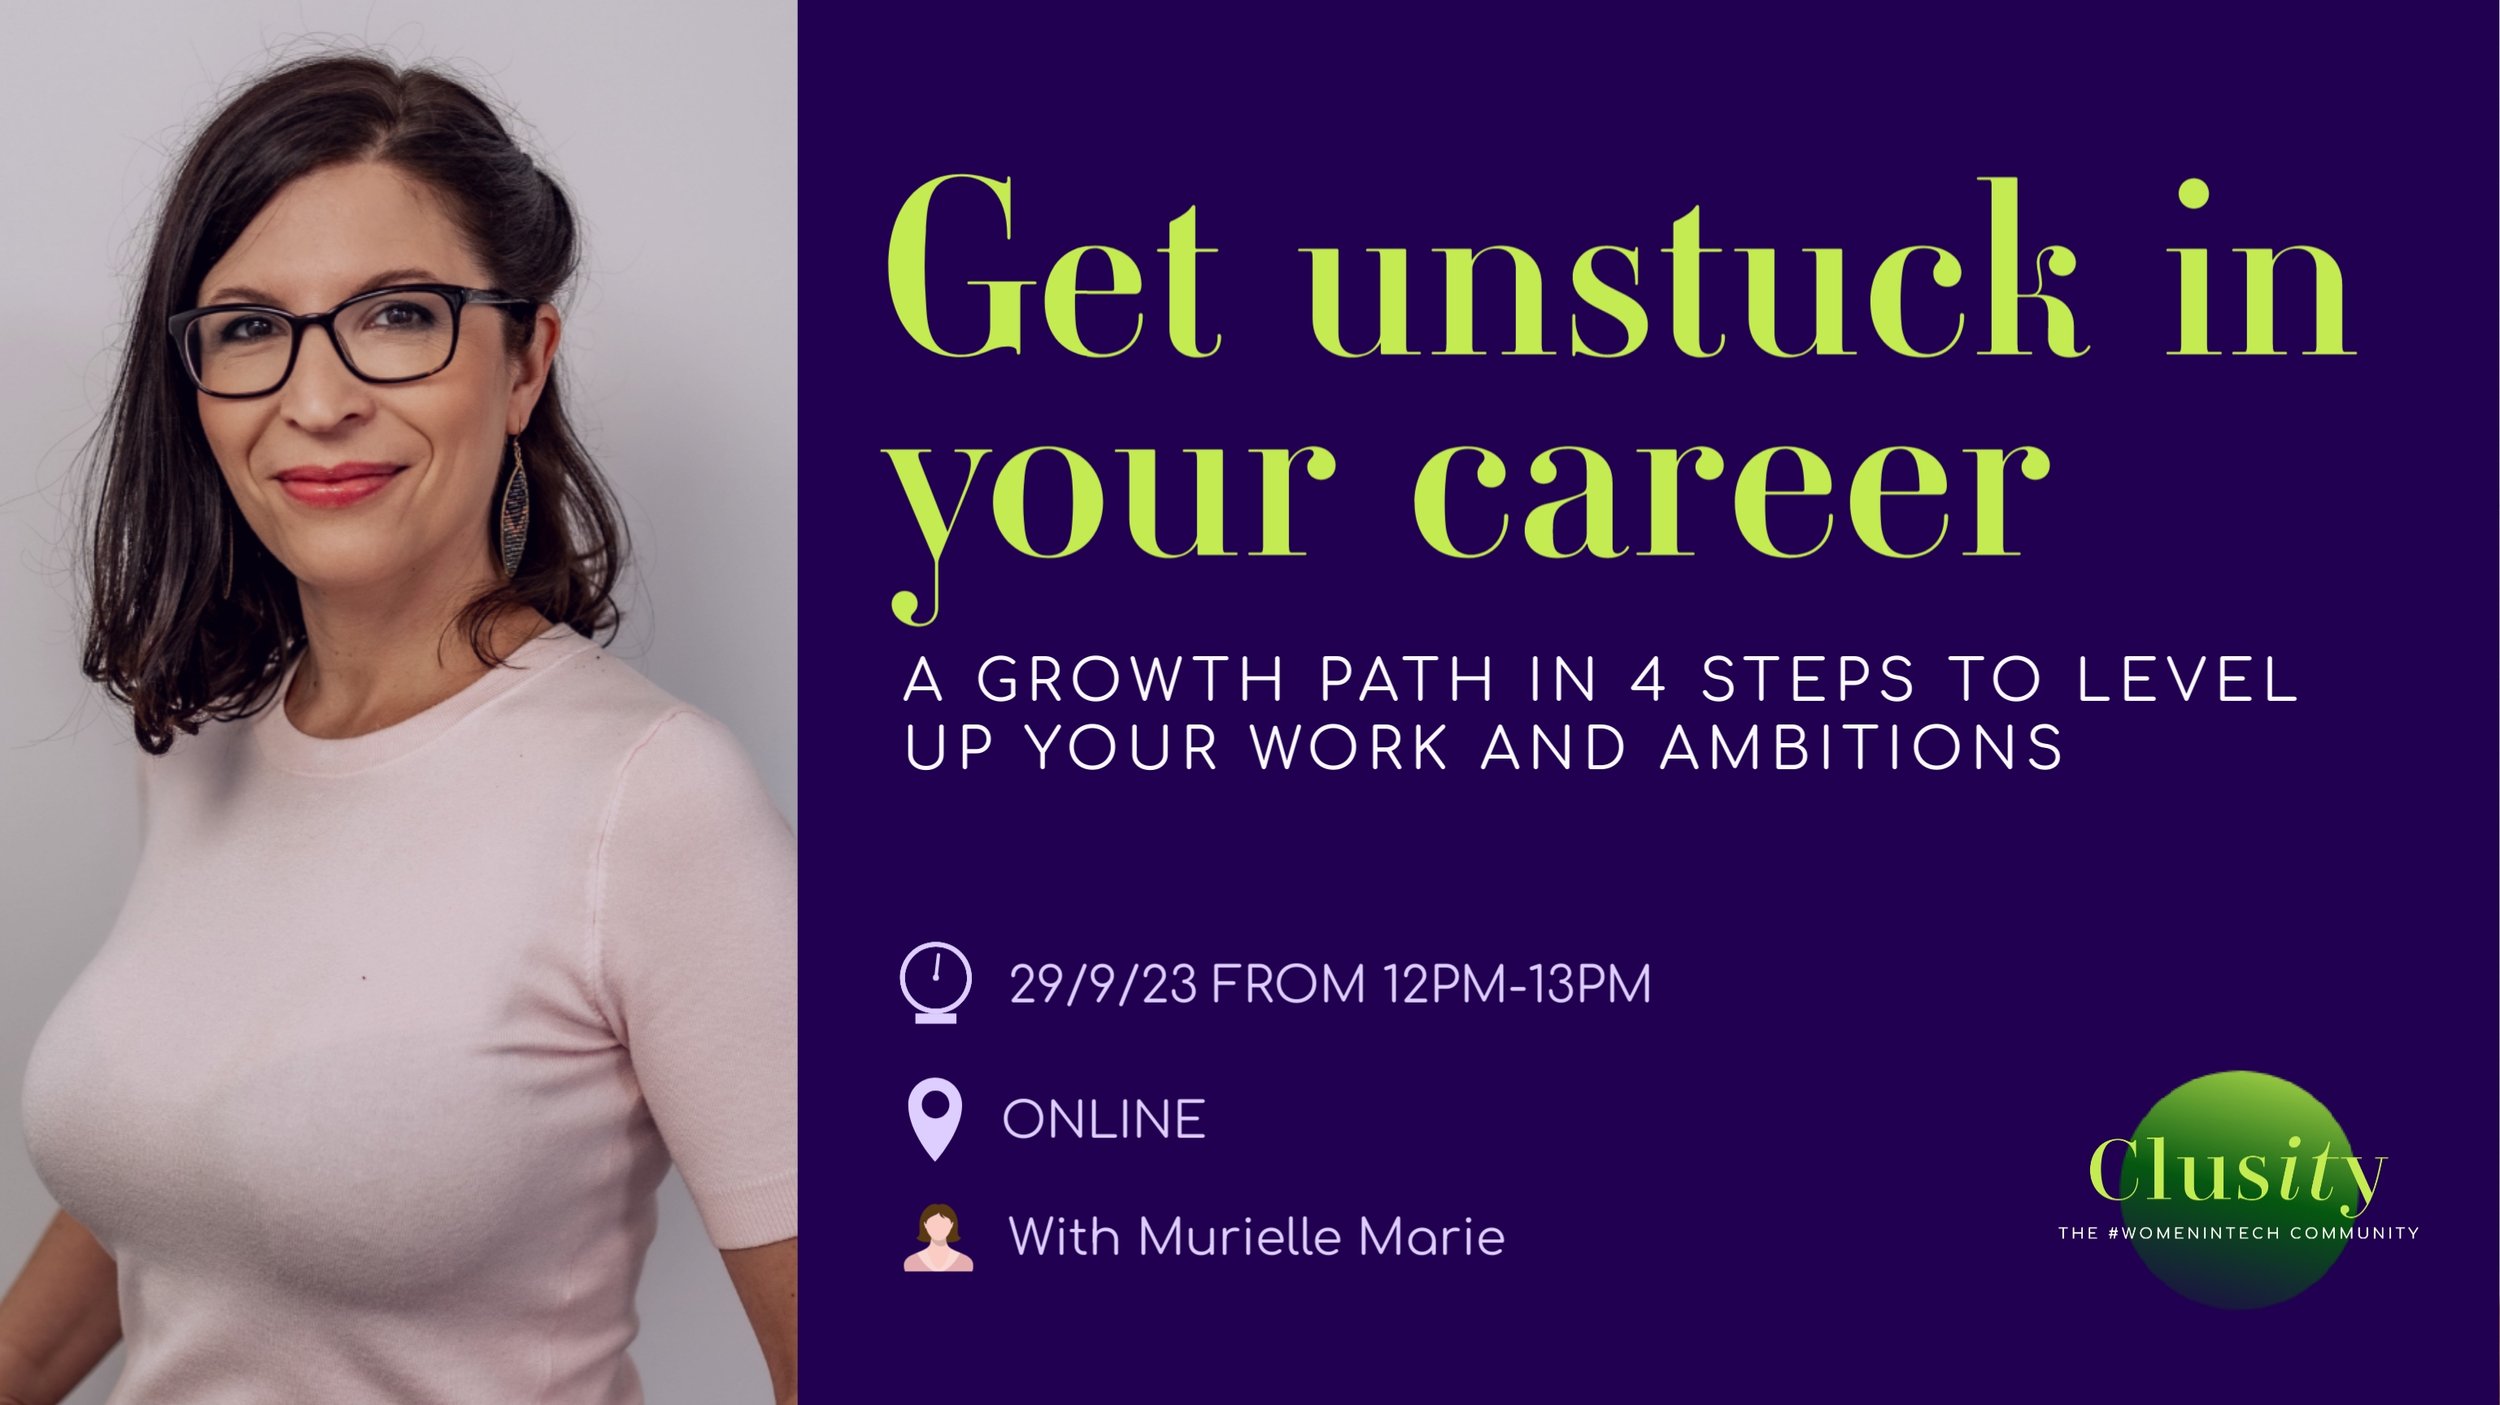 Get unstuck in your career with Murielle Marie